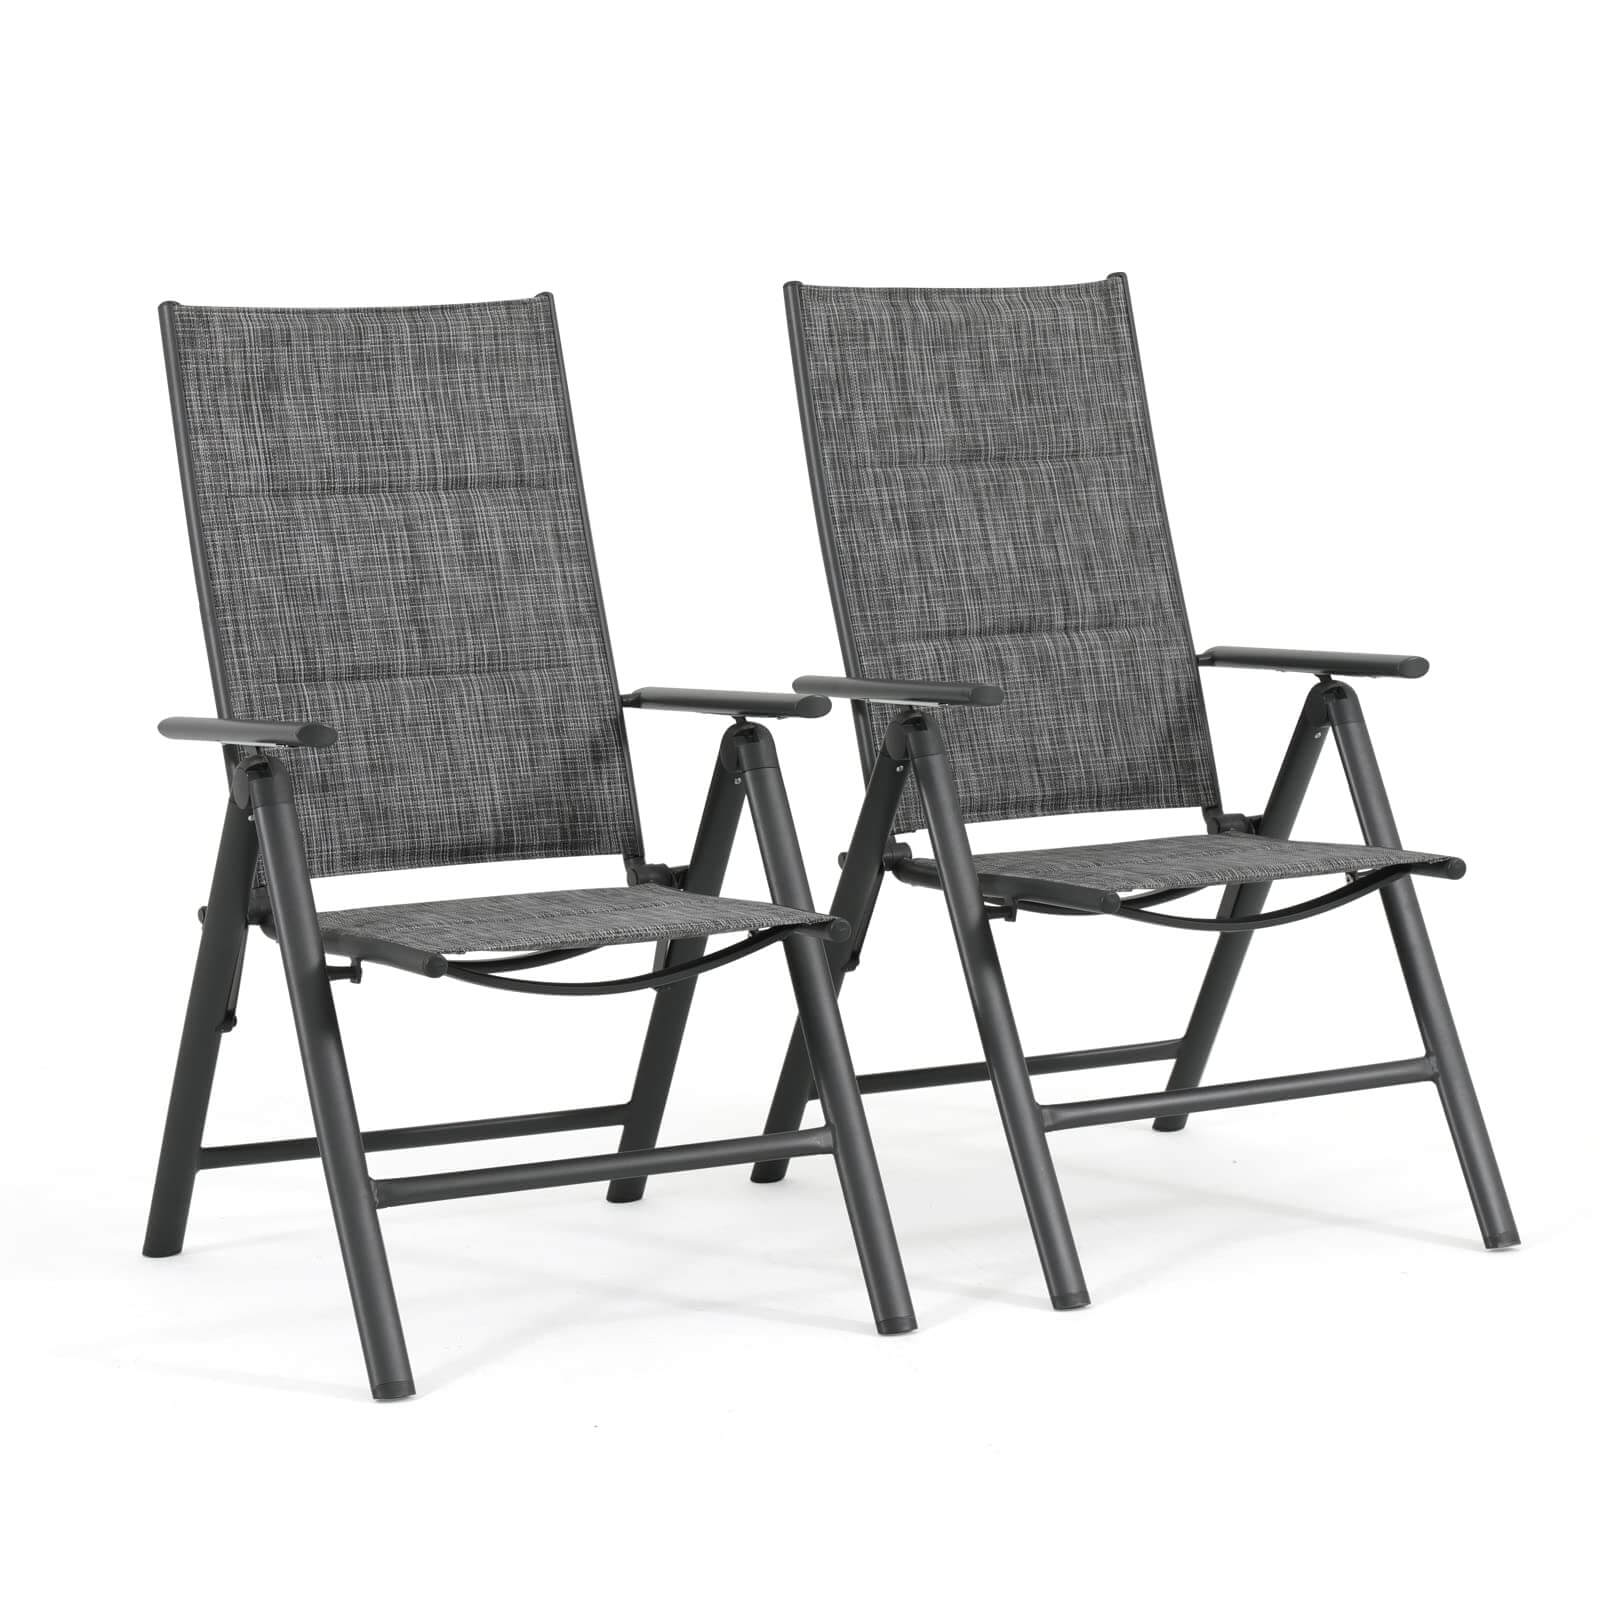 Folding Patio Chairs Set of 2, Aluminum Portable Reclining Lawn Chairs with Adjustable High Backrest